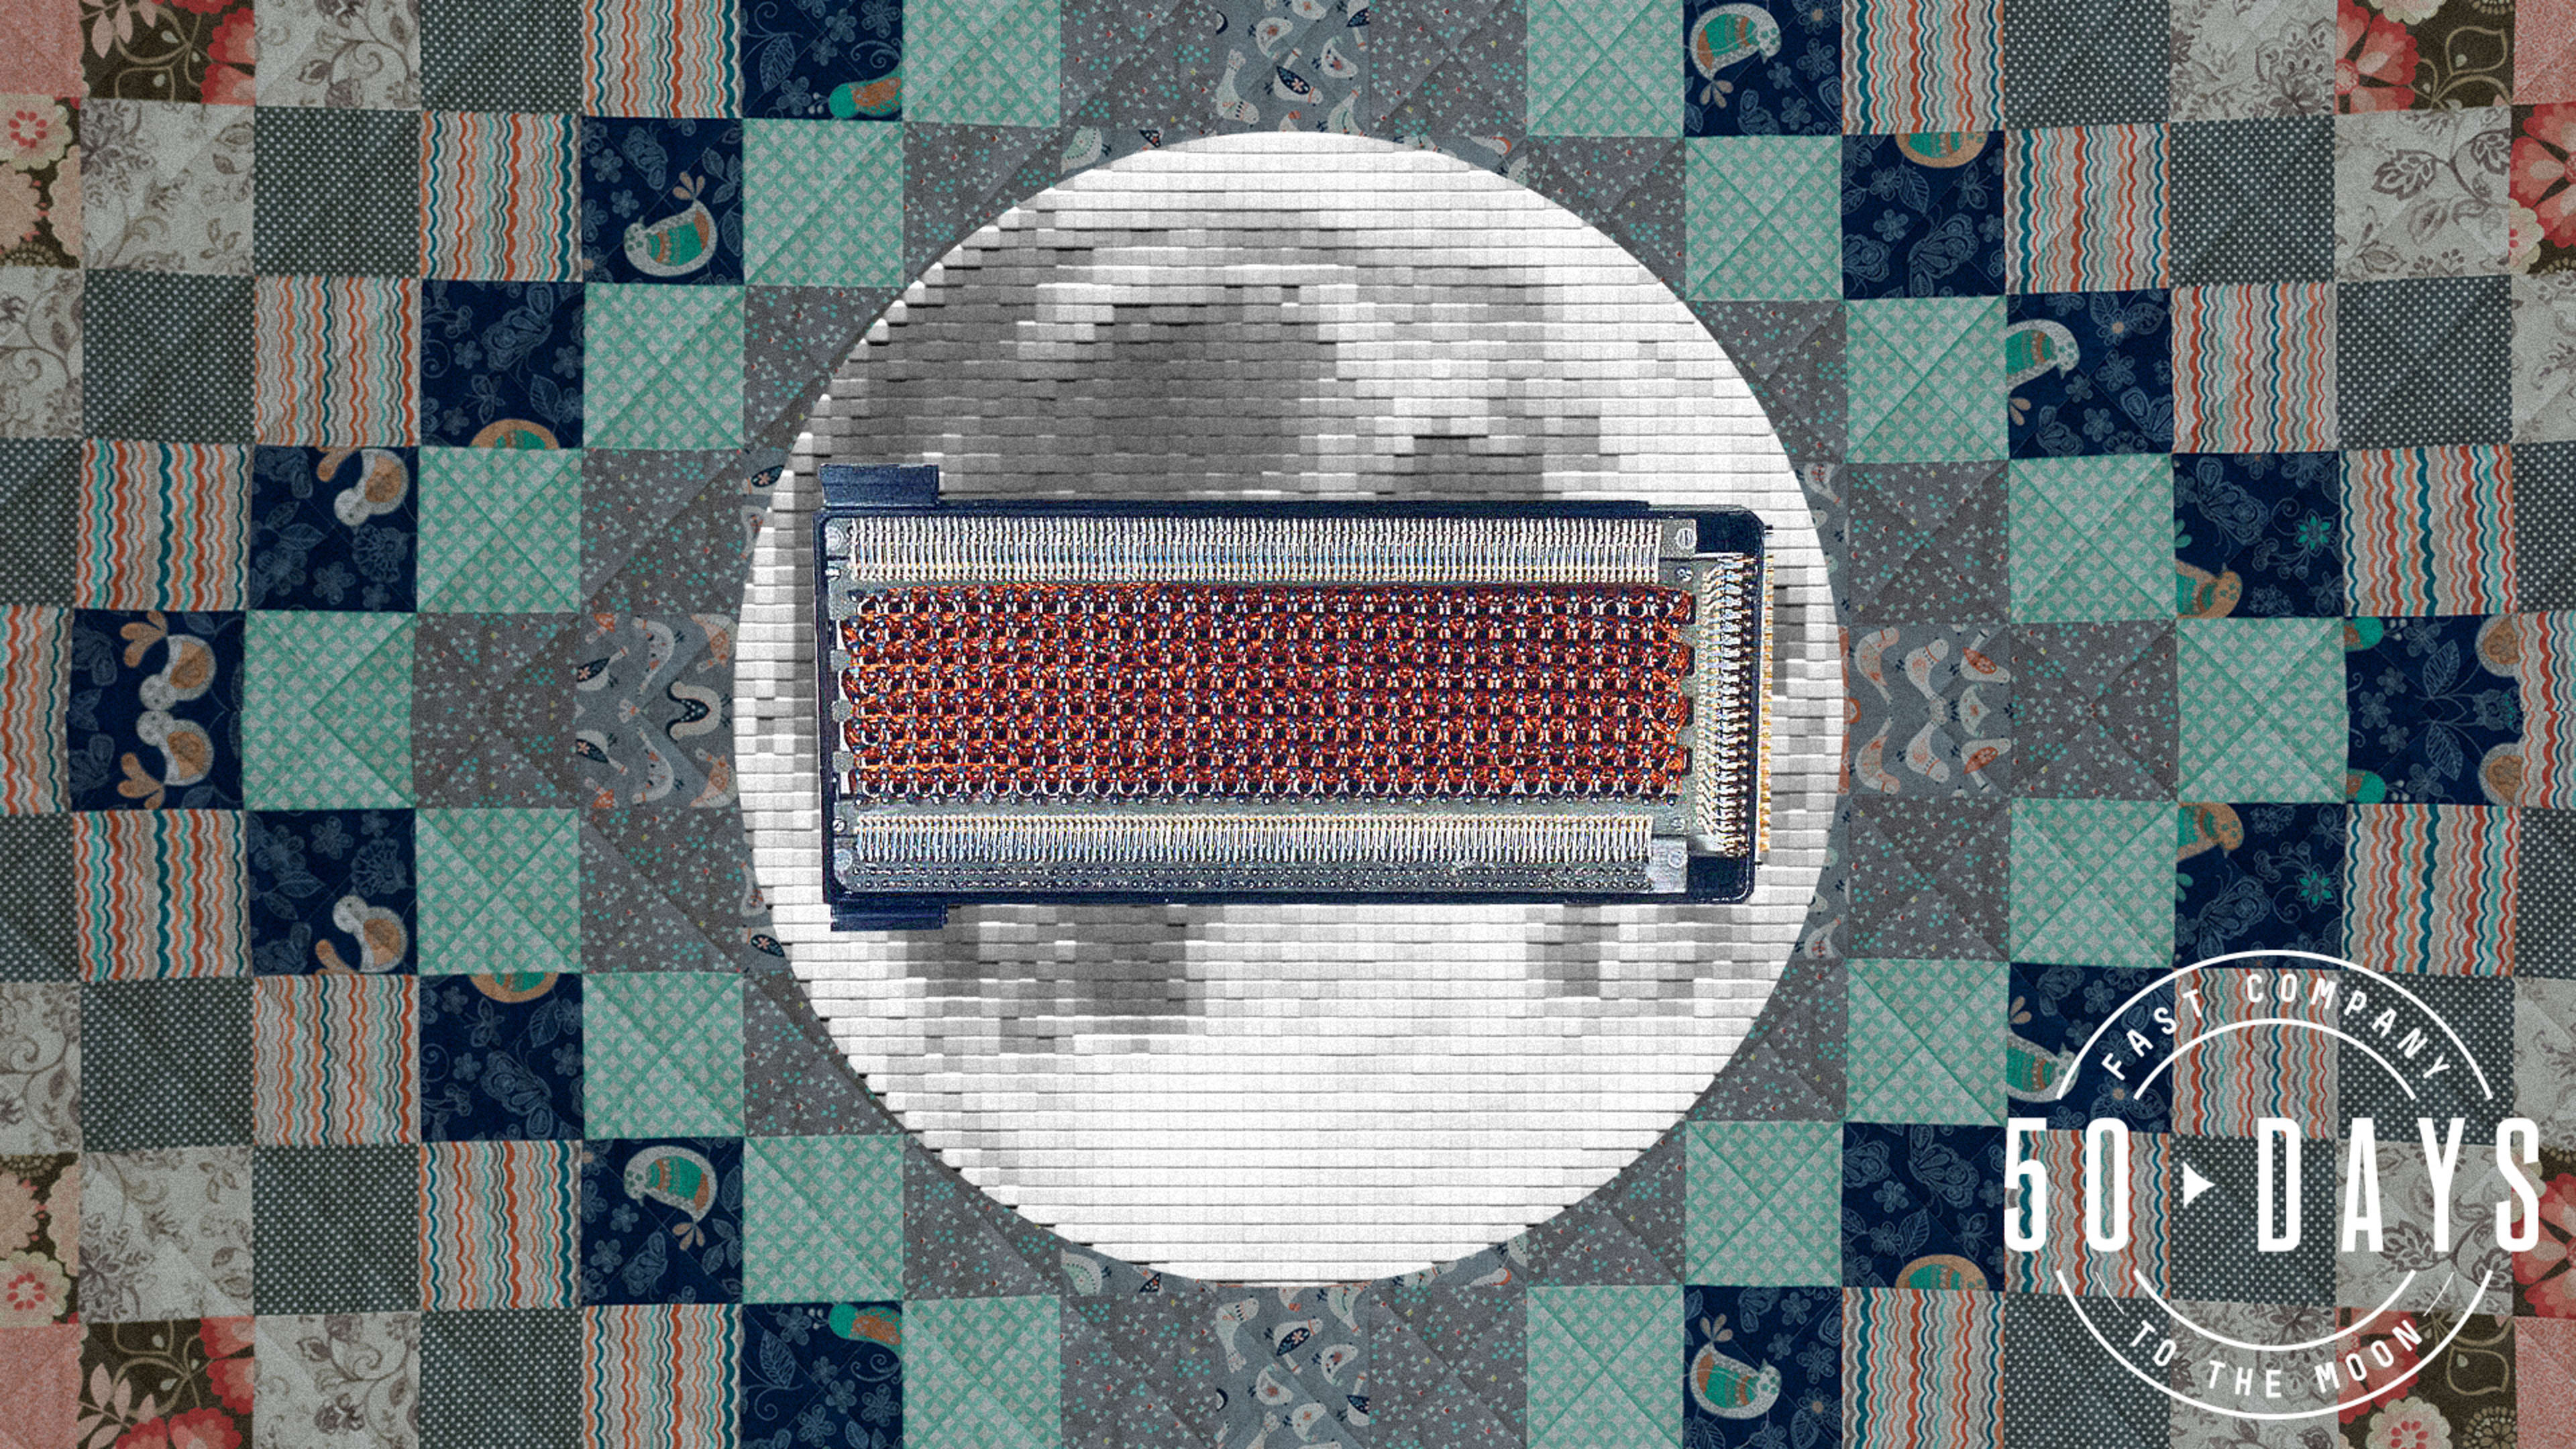 The guts of NASA’s pioneering Apollo computer were handwoven like a quilt